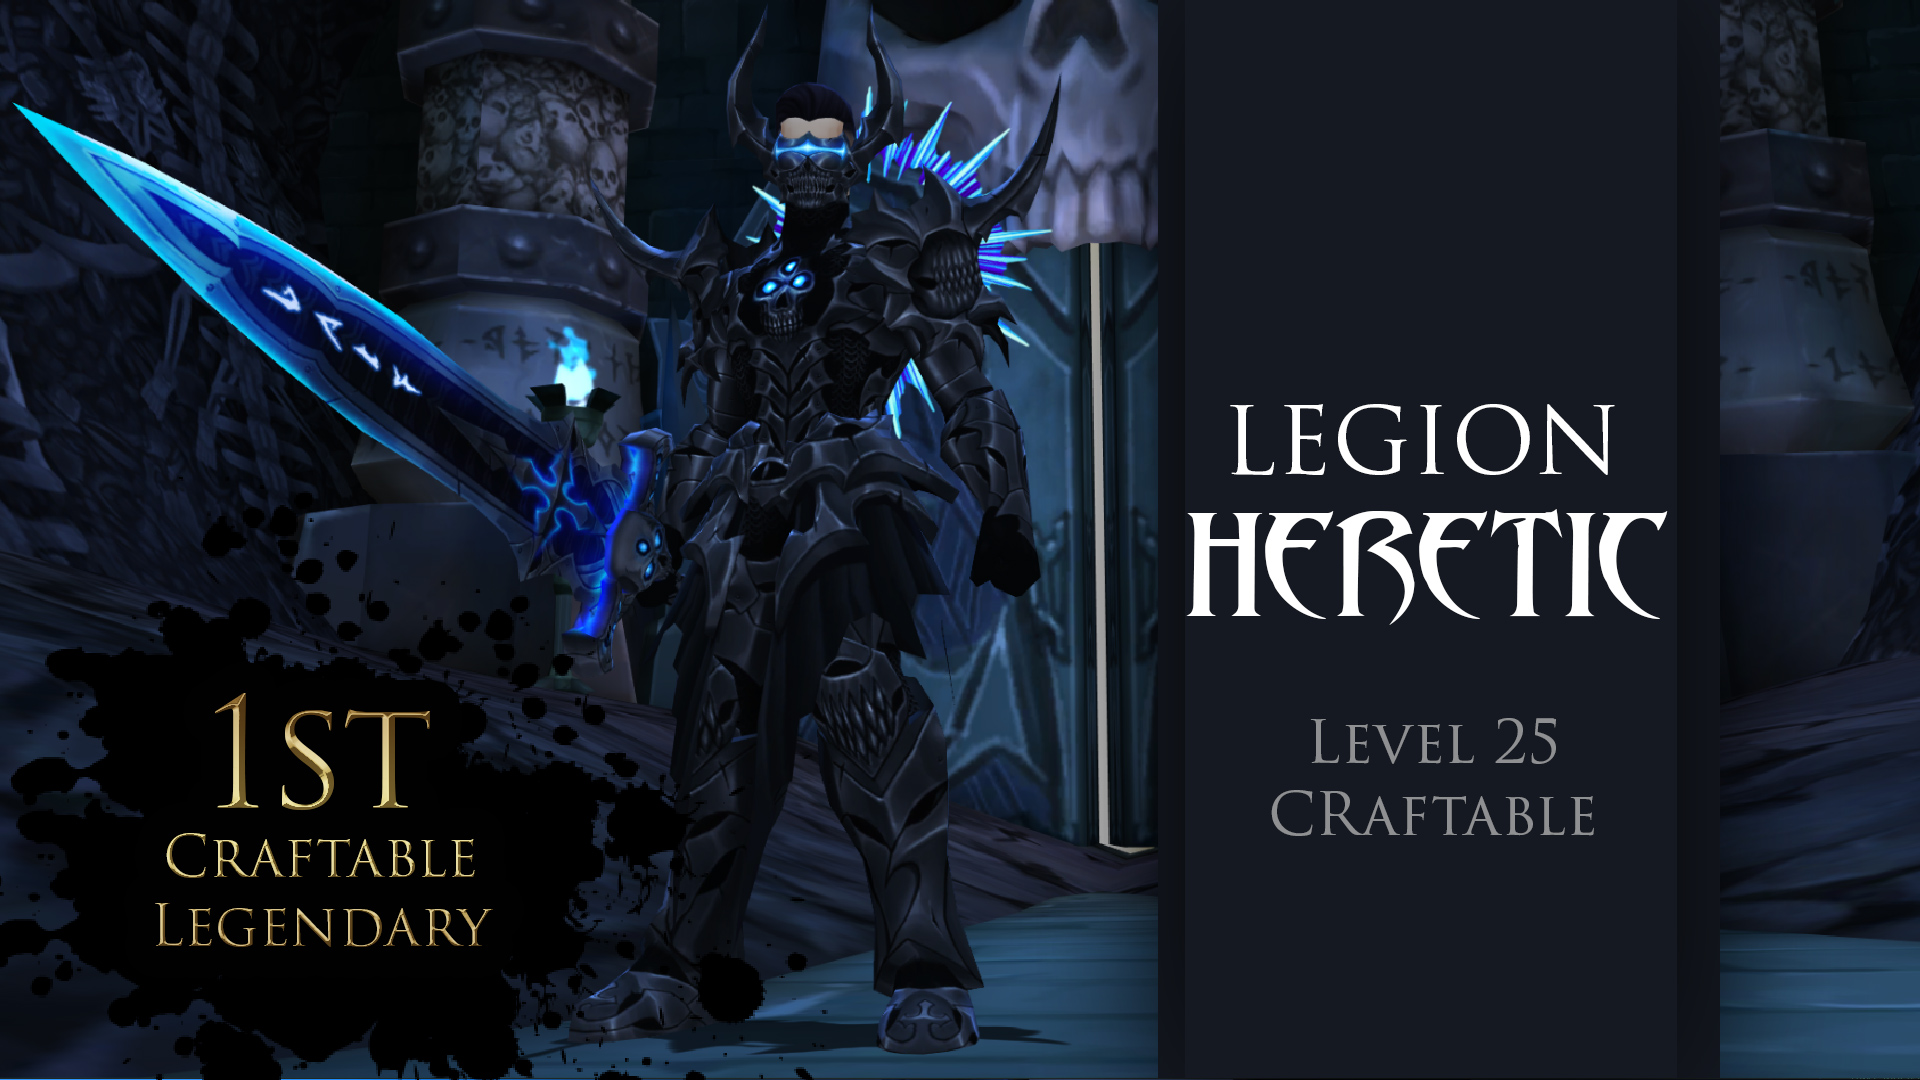 Legion Heretic armor is level 25 and the 1st craftable legendary